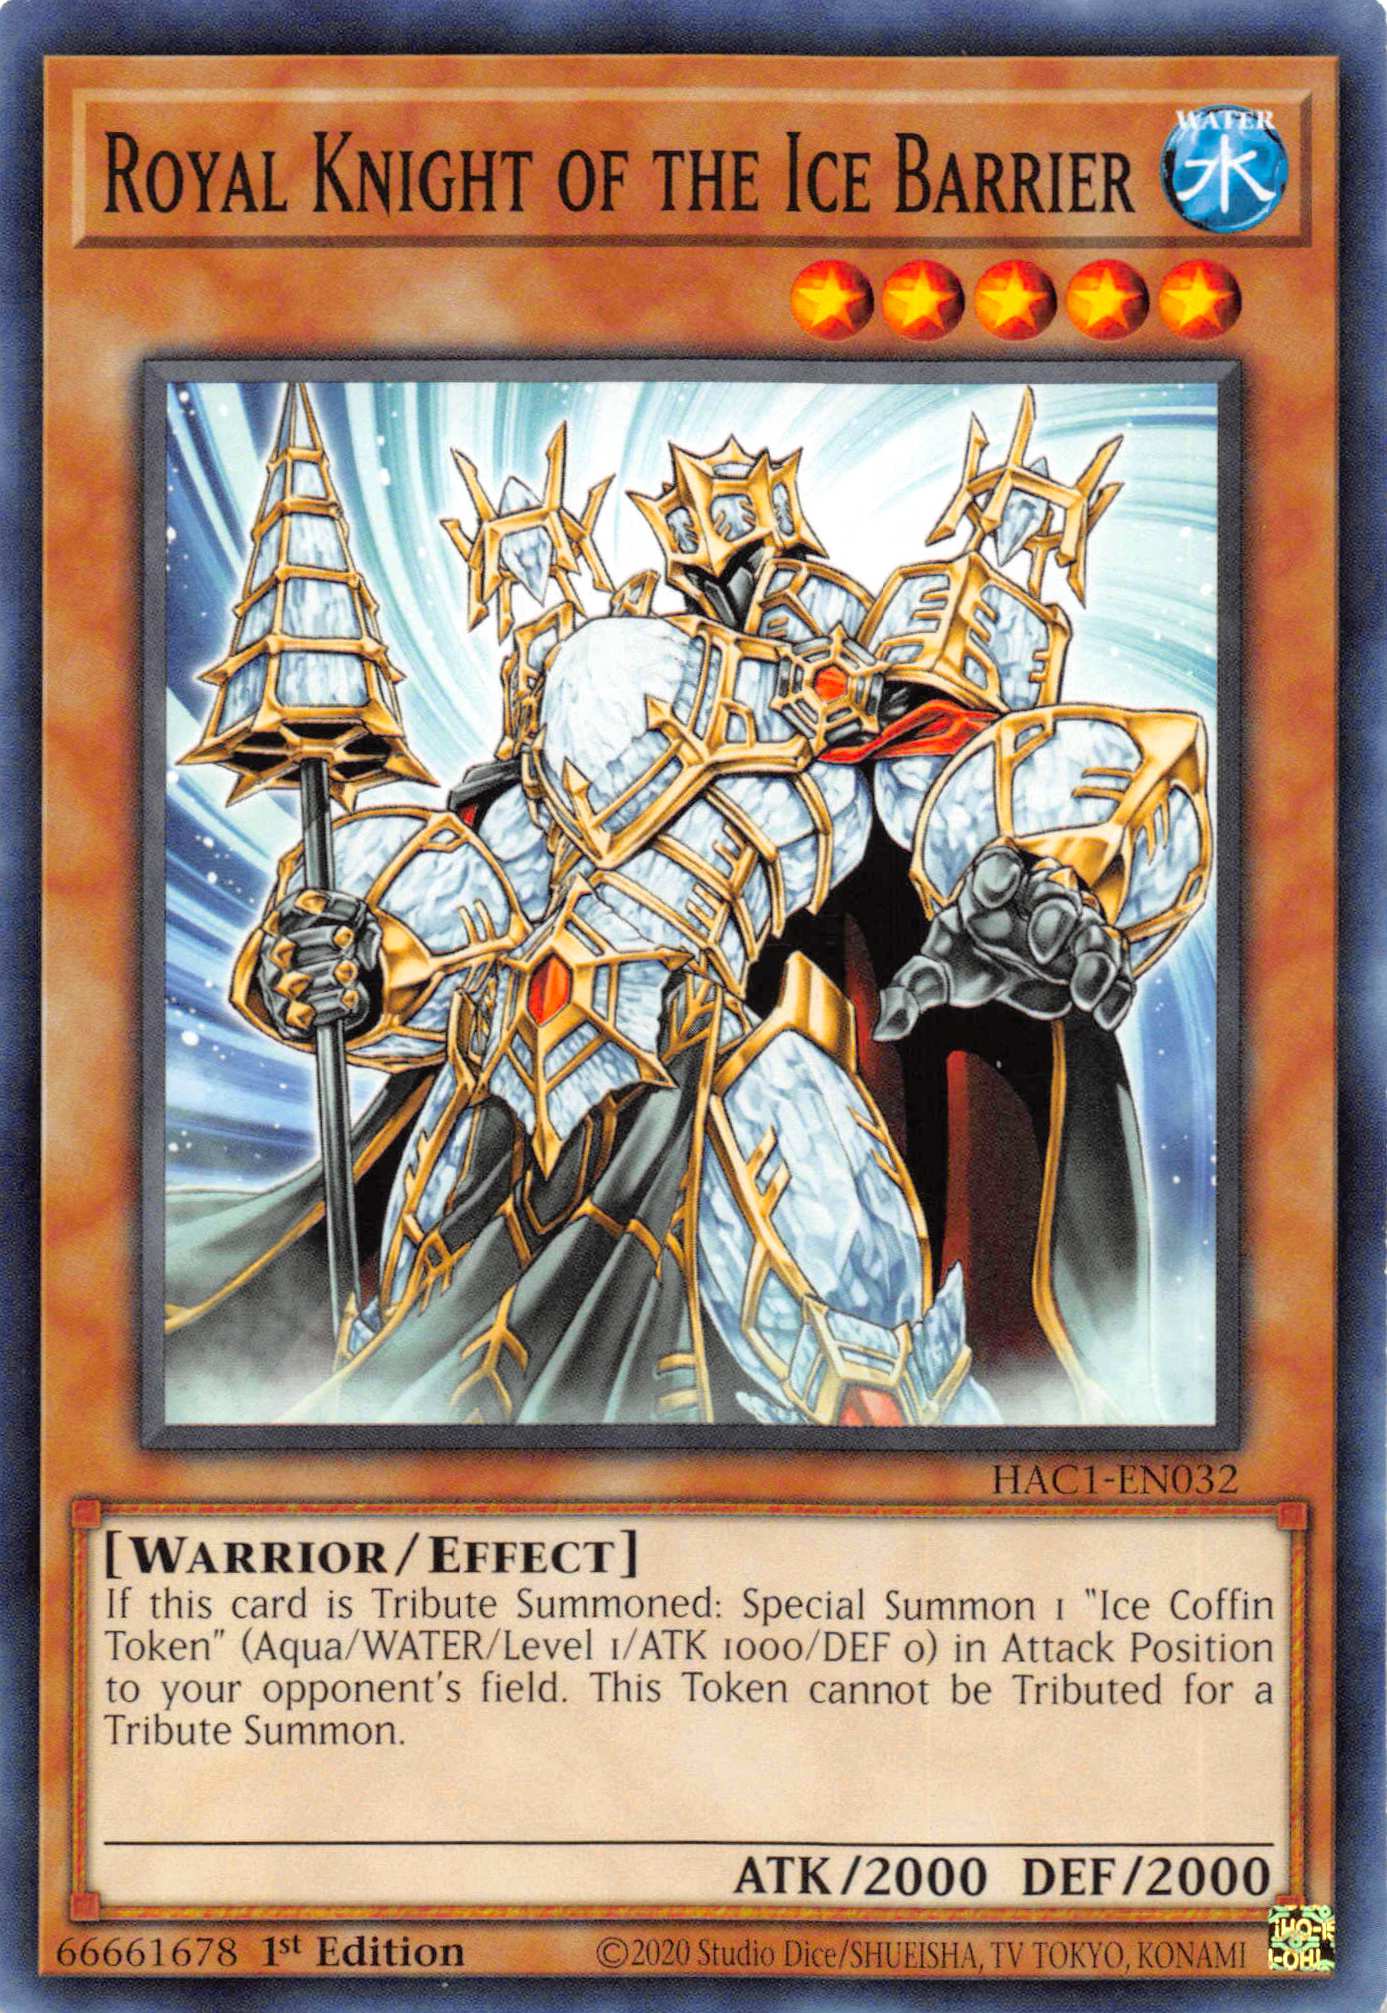 Royal Knight of the Ice Barrier [HAC1-EN032] Common | Devastation Store